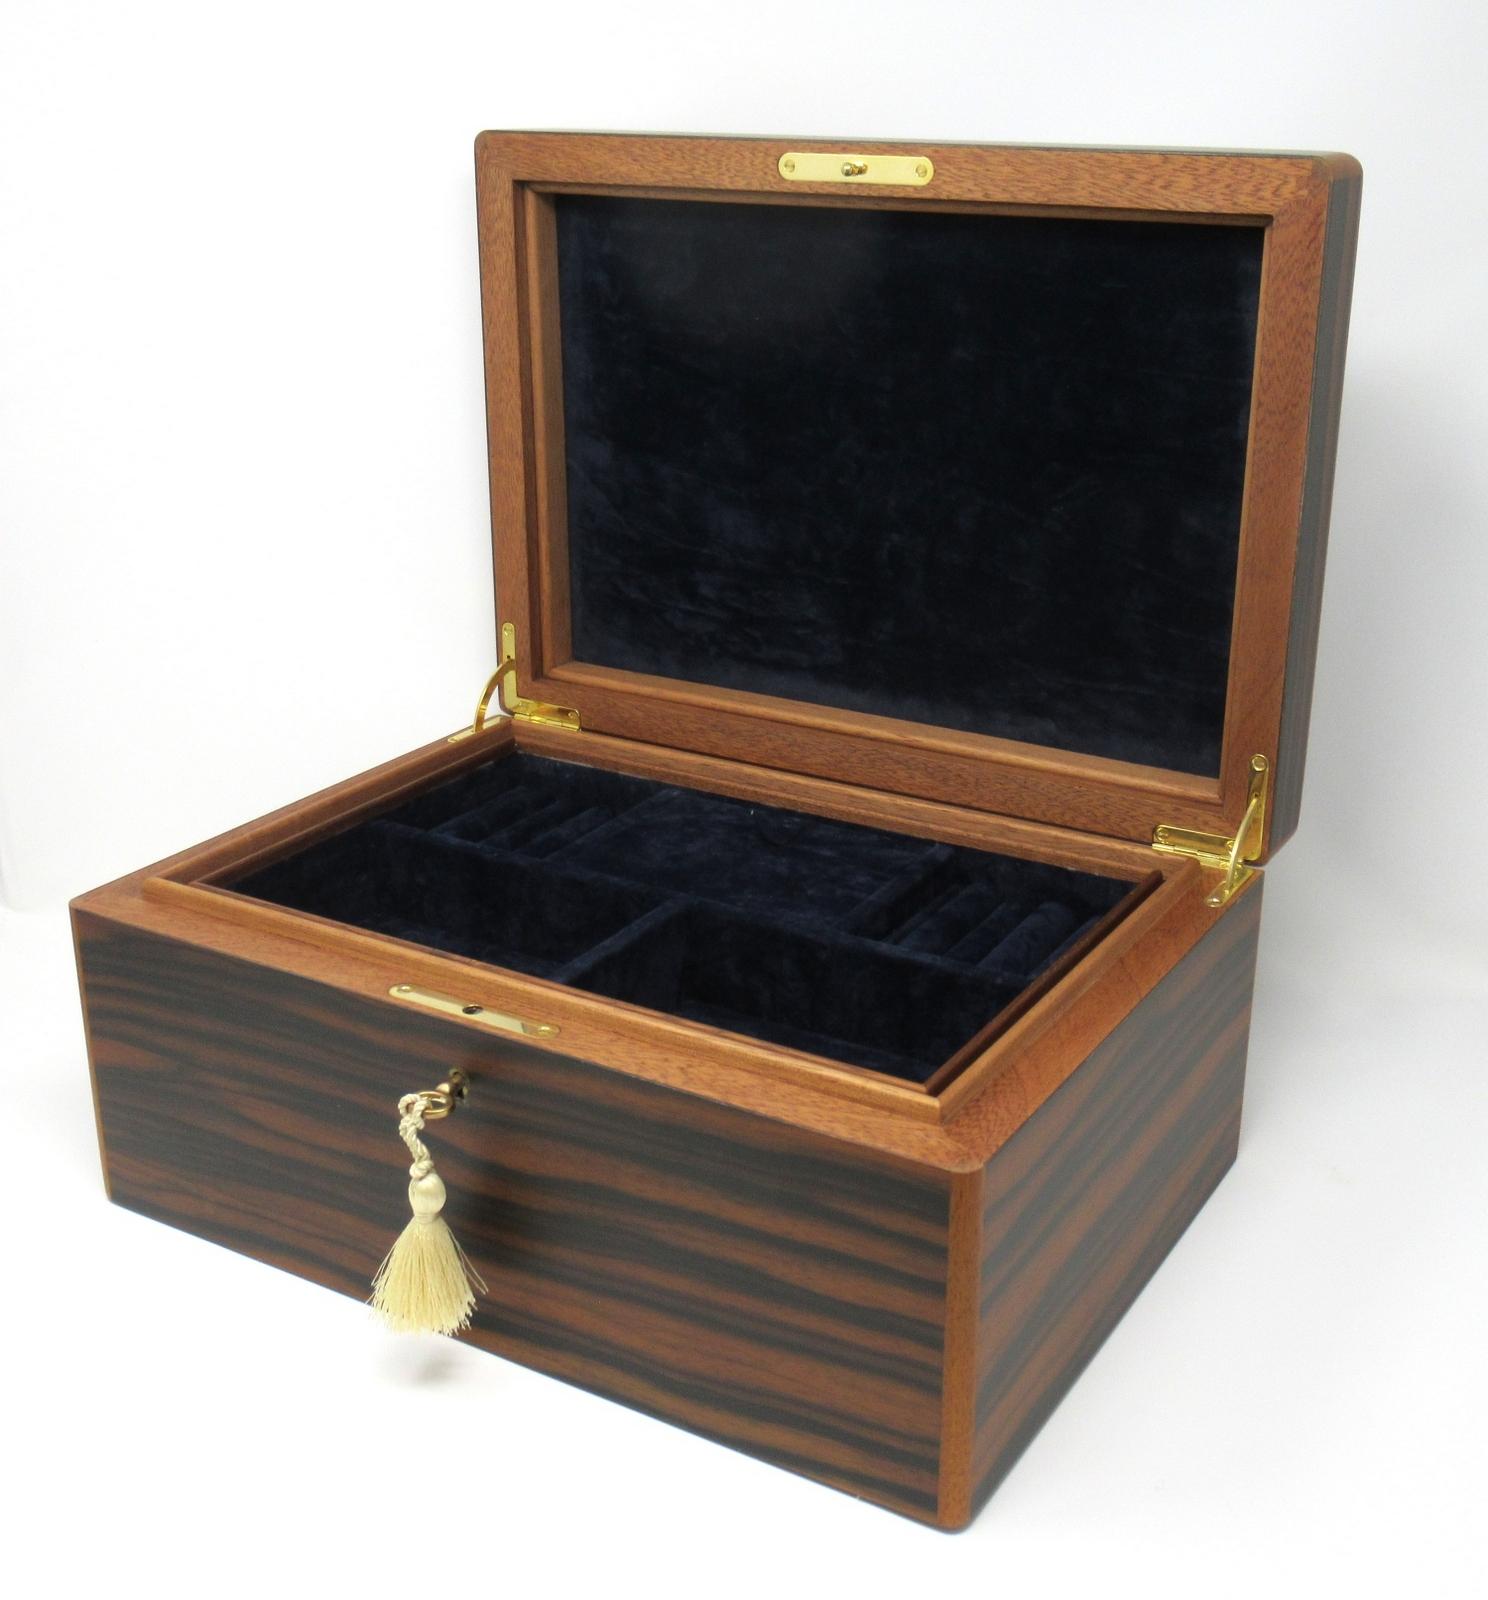 Stunning Well Figured Mahogany Ladies or gentleman's jewelery box casket made by manning of Ireland of generous proportions, with interior and lift out tray lined in luxury dark navy blue velvet lining. Finest quality superior gold-plated hinges,